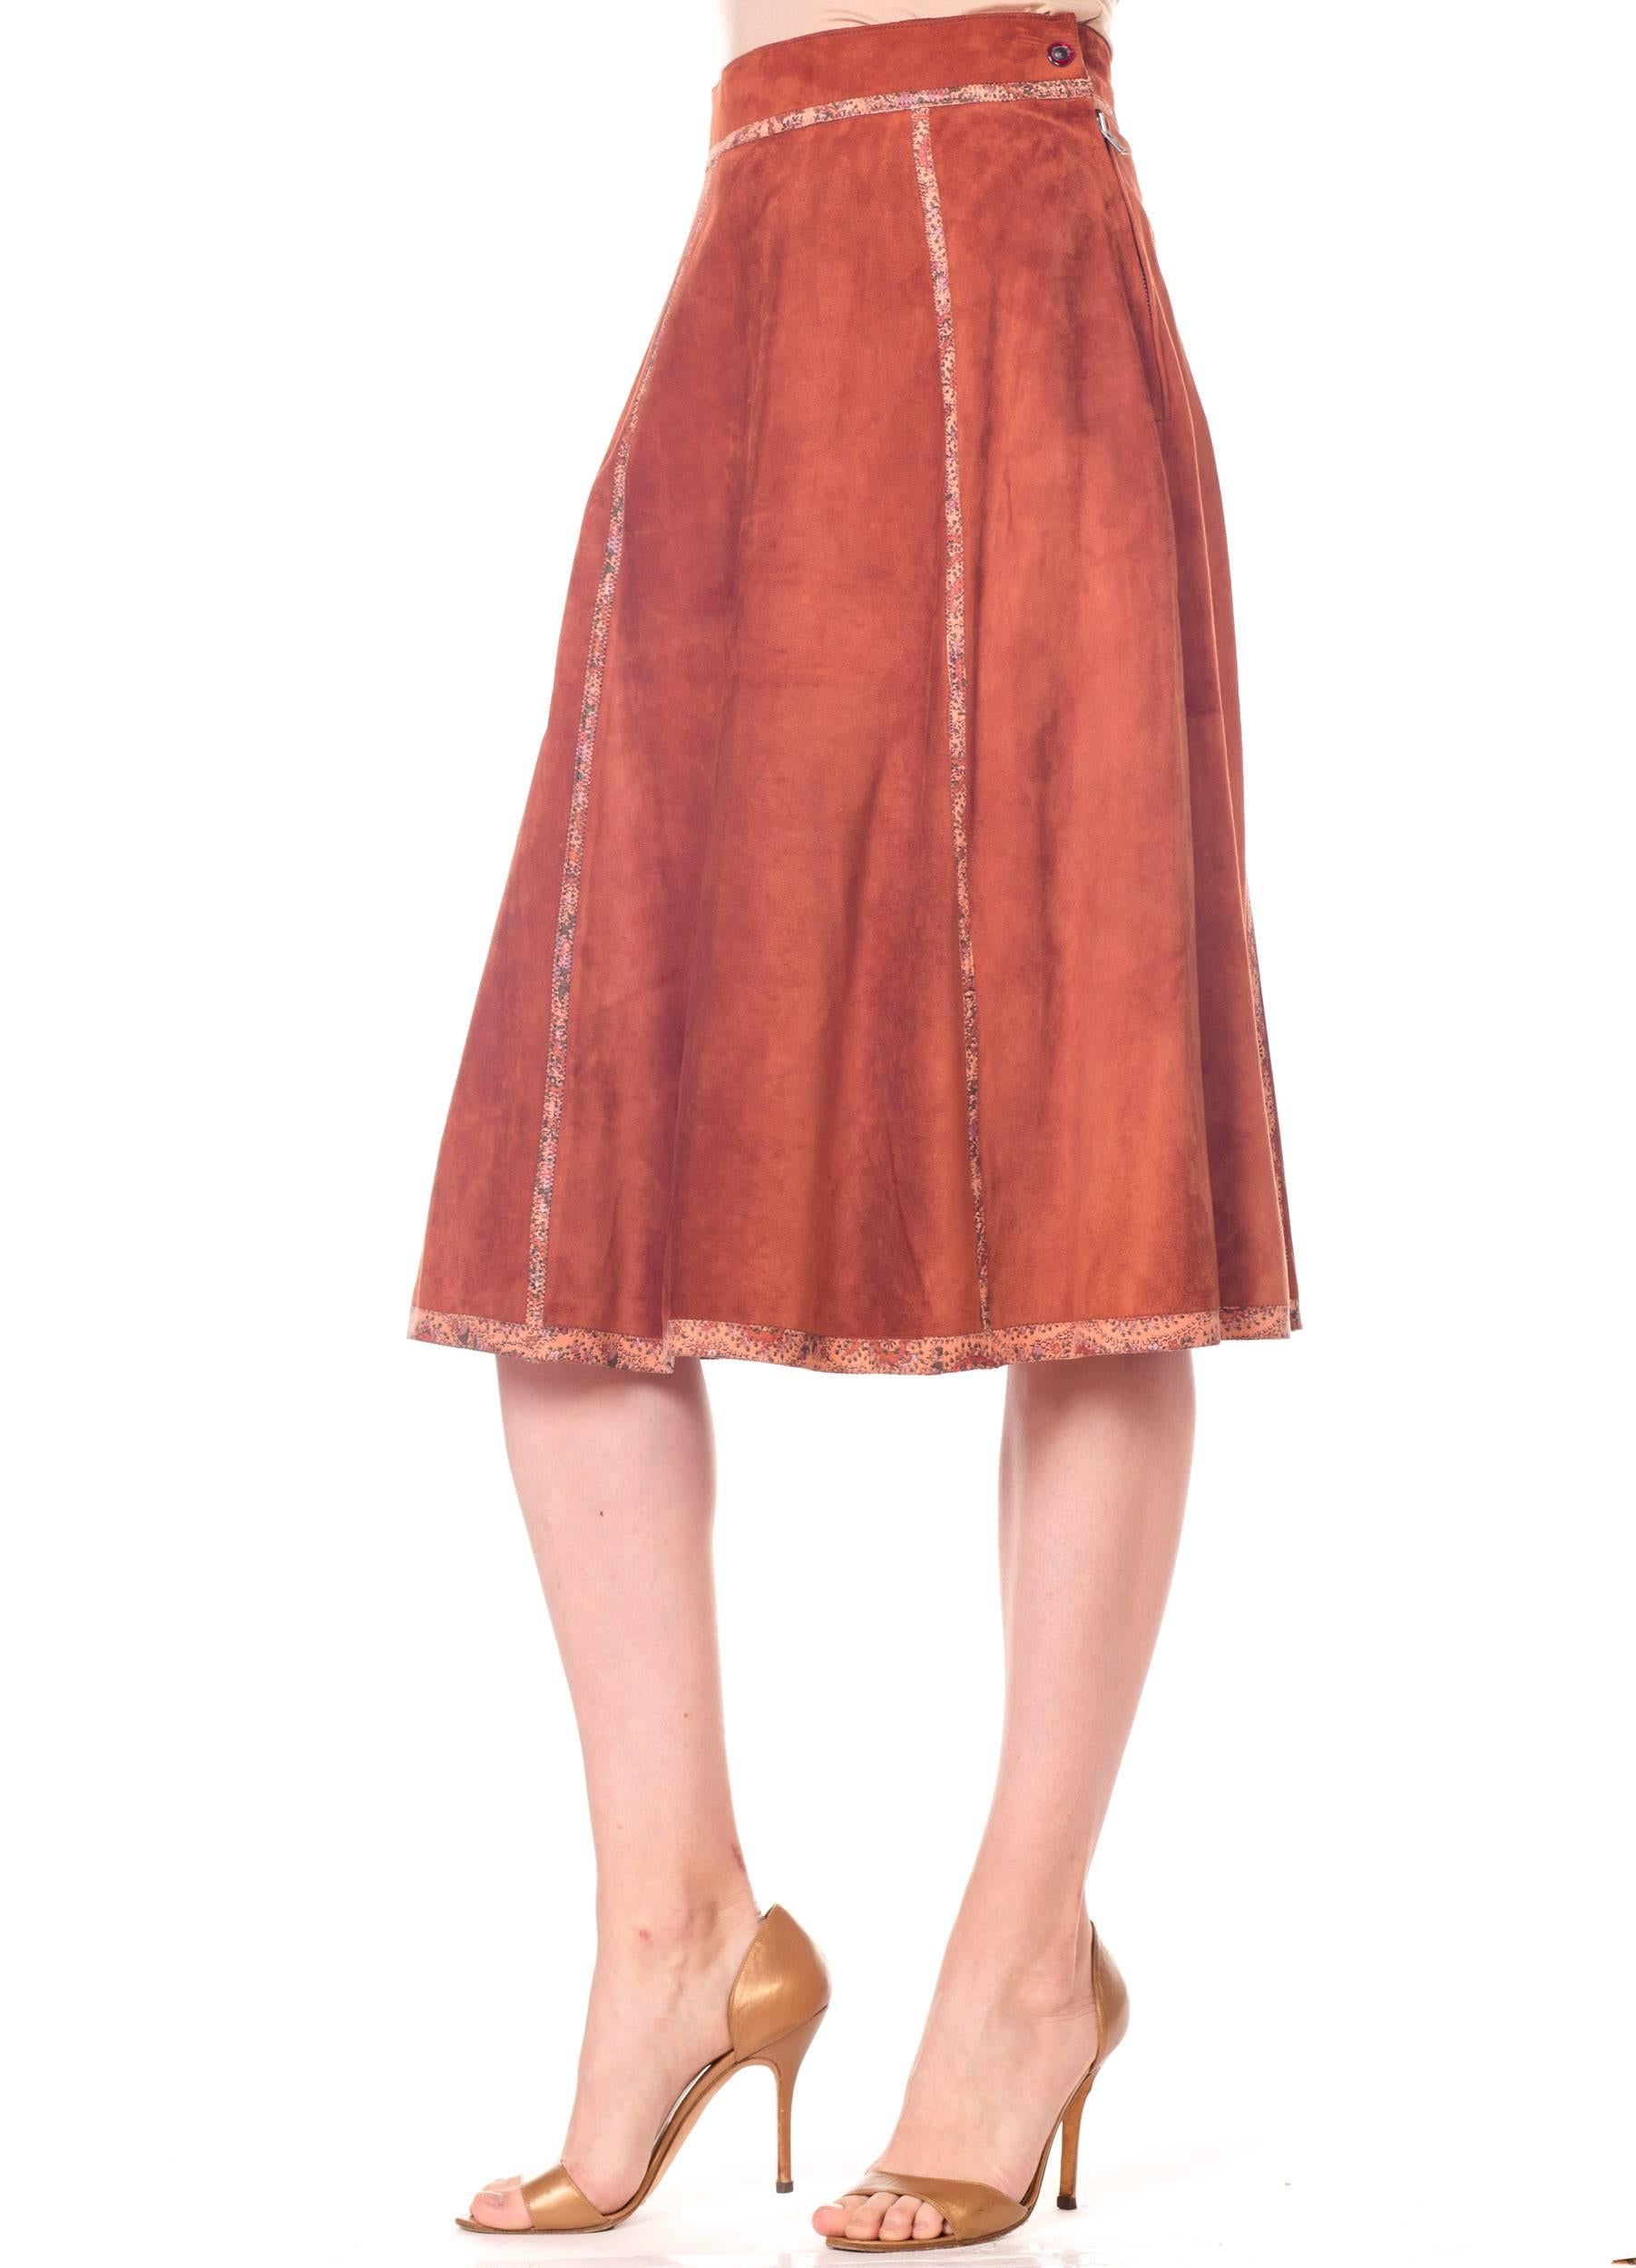 Roberto Cavalli Brown Suede Midi Skirt with Floral Leather Printed Trim 1970s 1